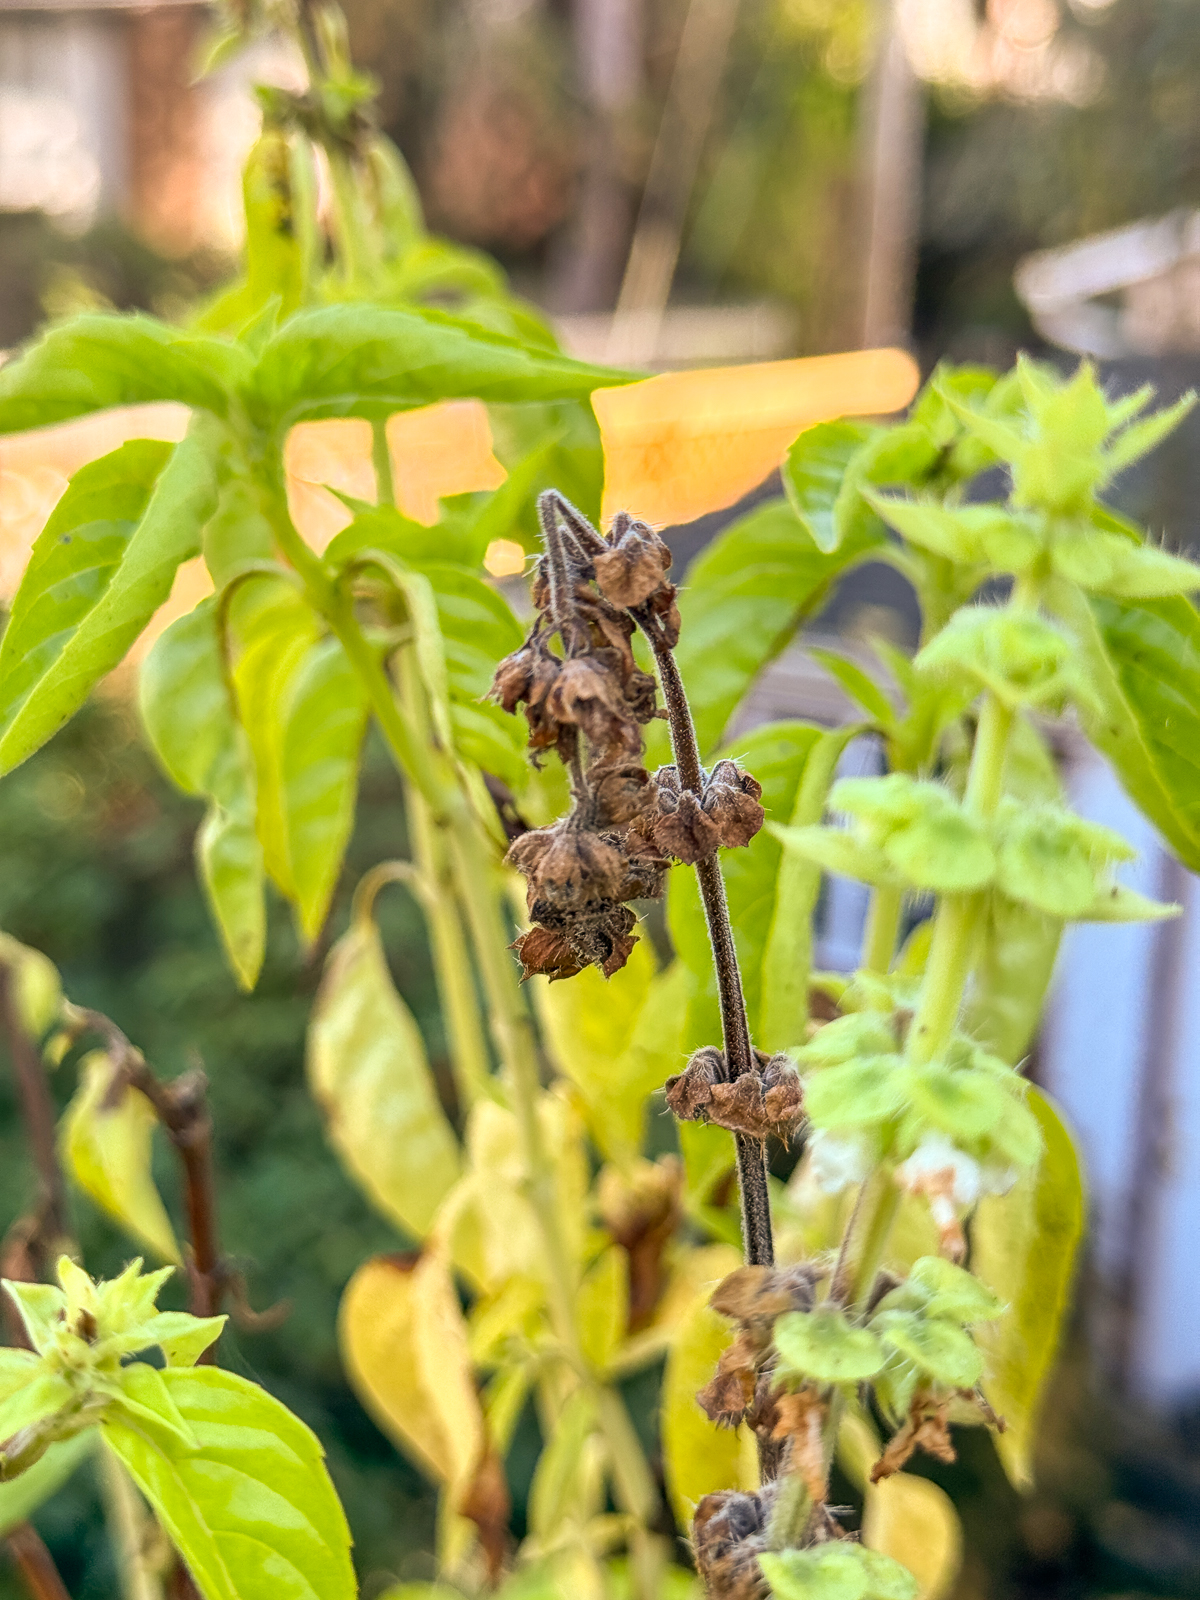 basil seed pods ready for harvest